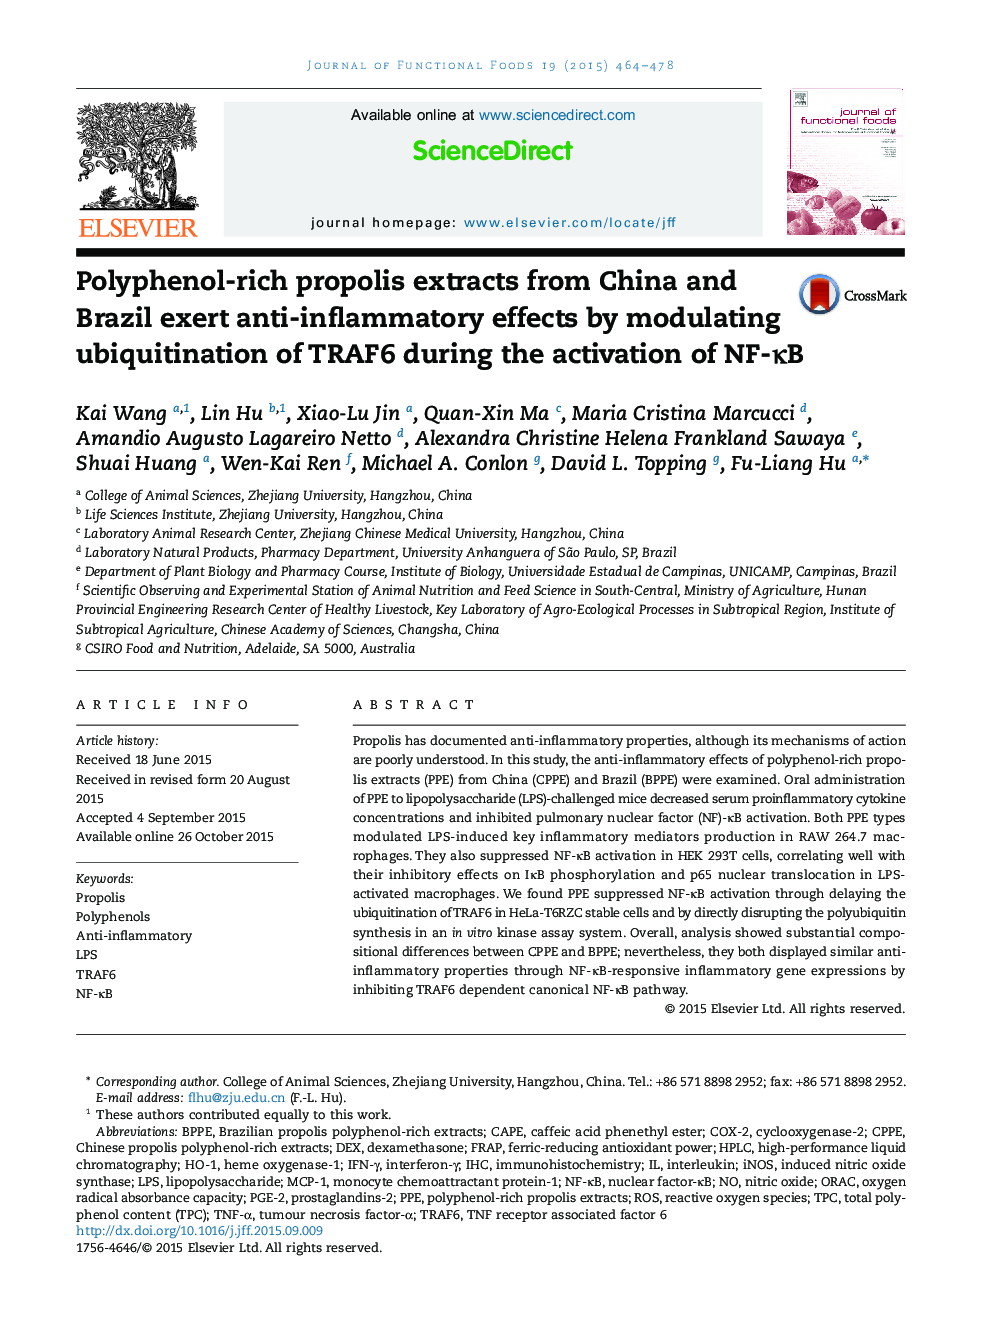 Polyphenol-rich propolis extracts from China and Brazil exert anti-inflammatory effects by modulating ubiquitination of TRAF6 during the activation of NF-κB